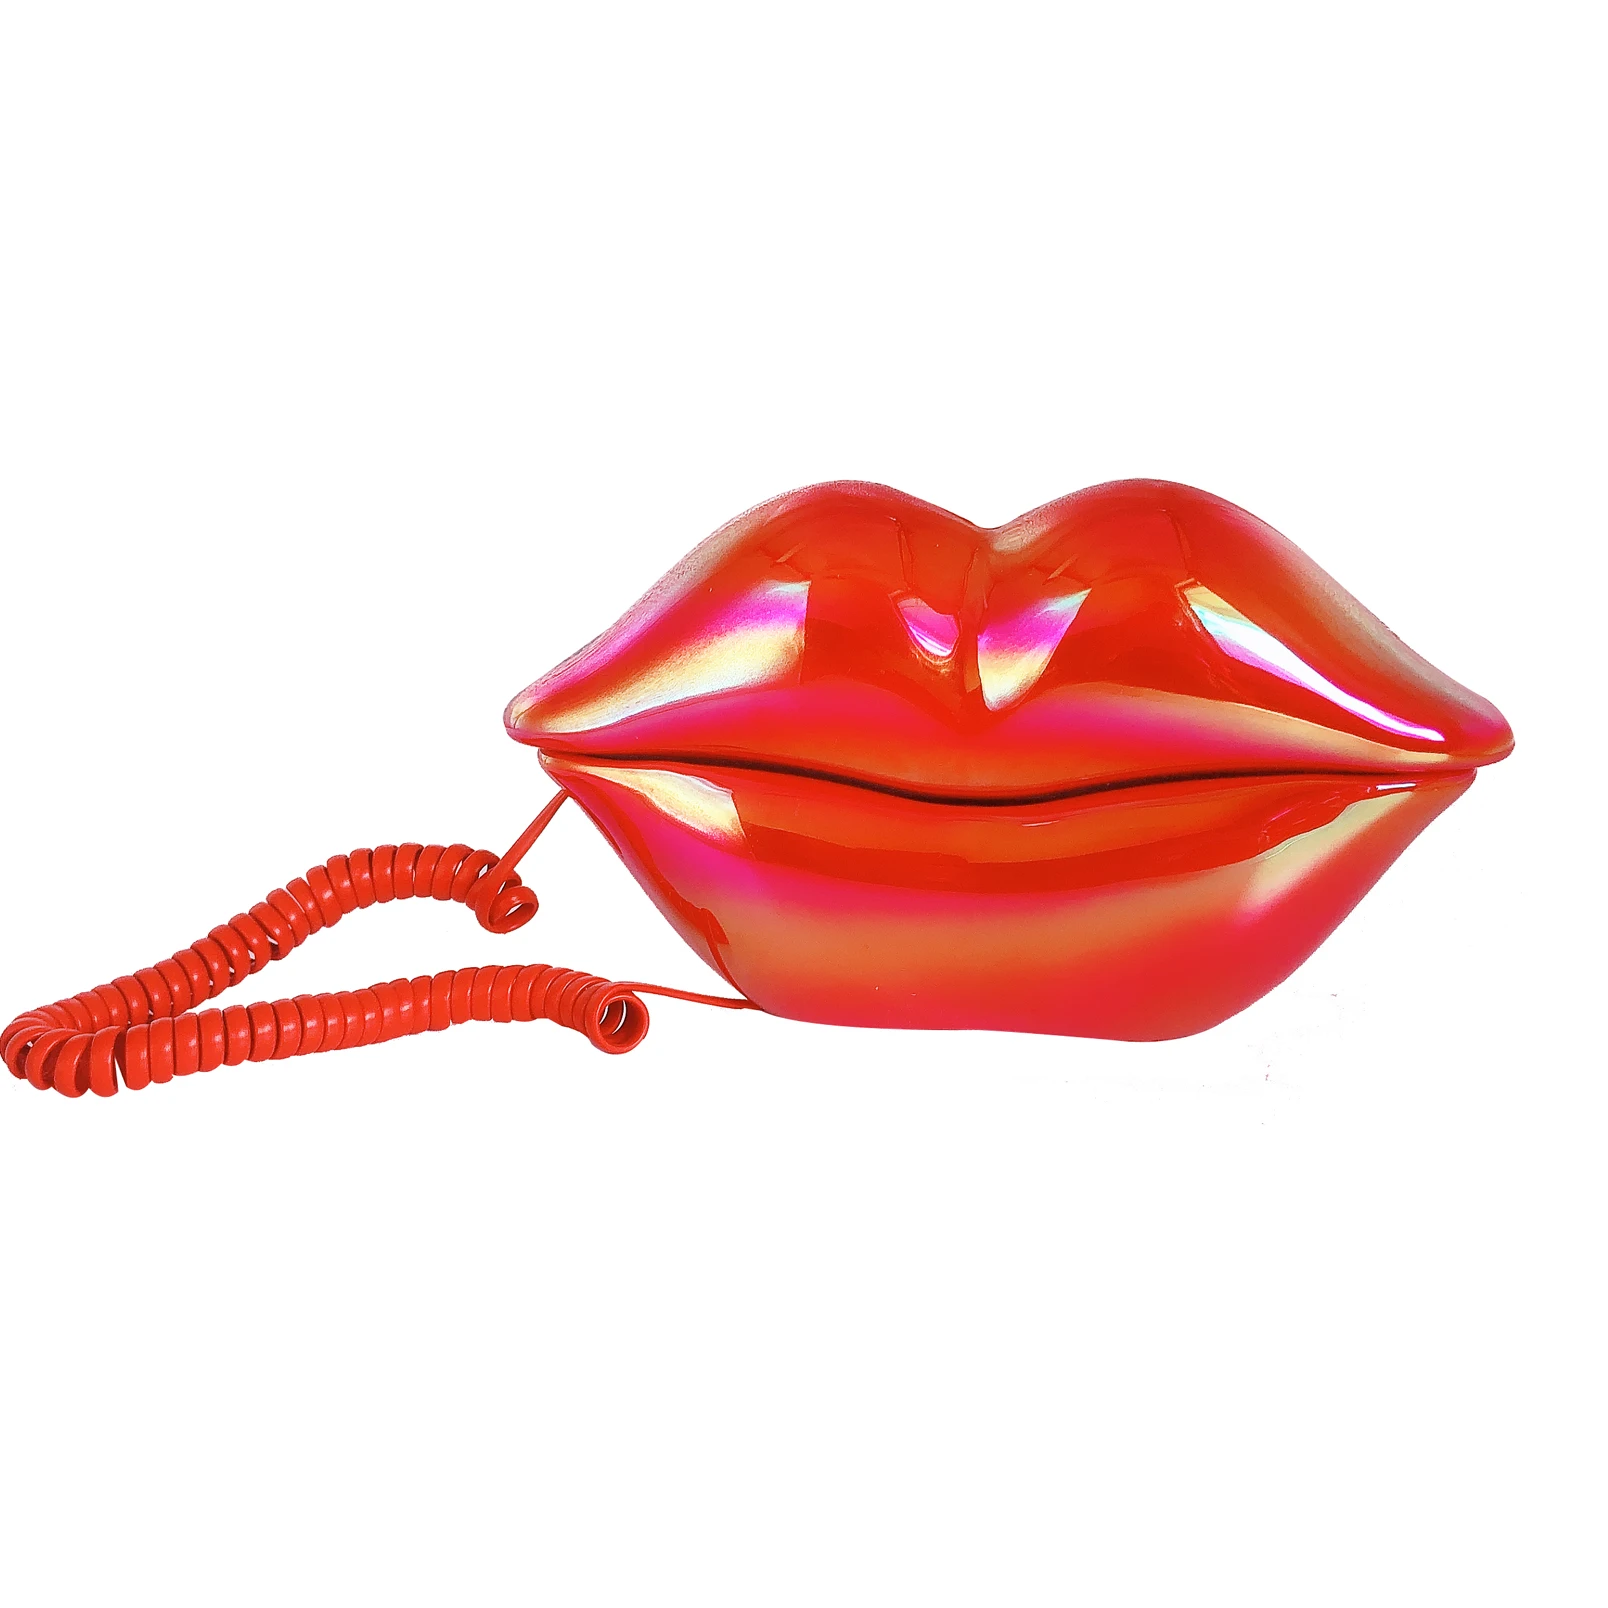 

Corded Landline Home Phones, Funny Novelty Lips Phone, Wired Mouth Telephone Cartoon Shaped Real Land line Home Office